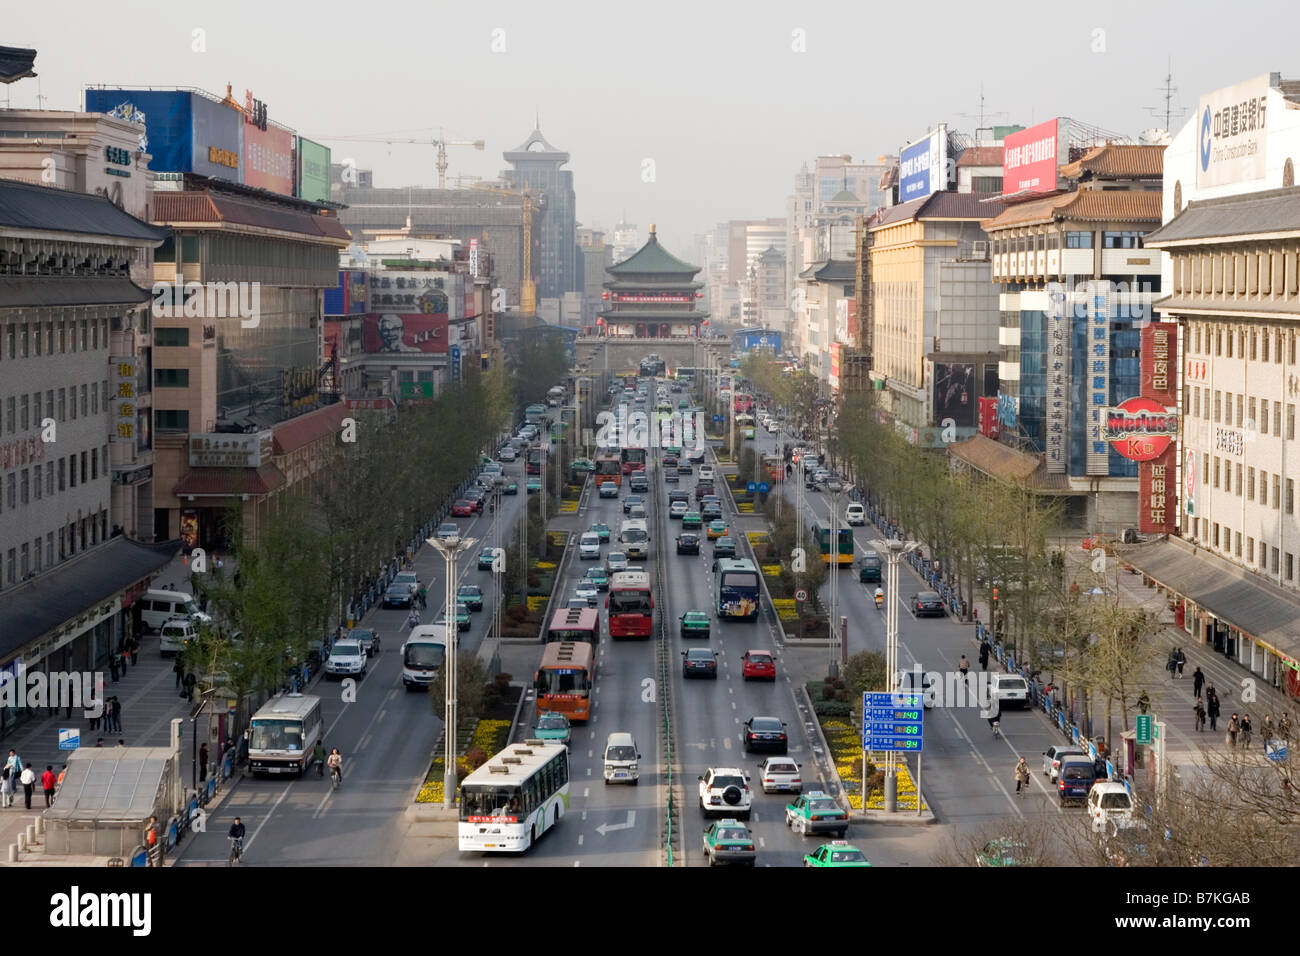 Major road leading to the town centre of Xian in China. Stock Photo